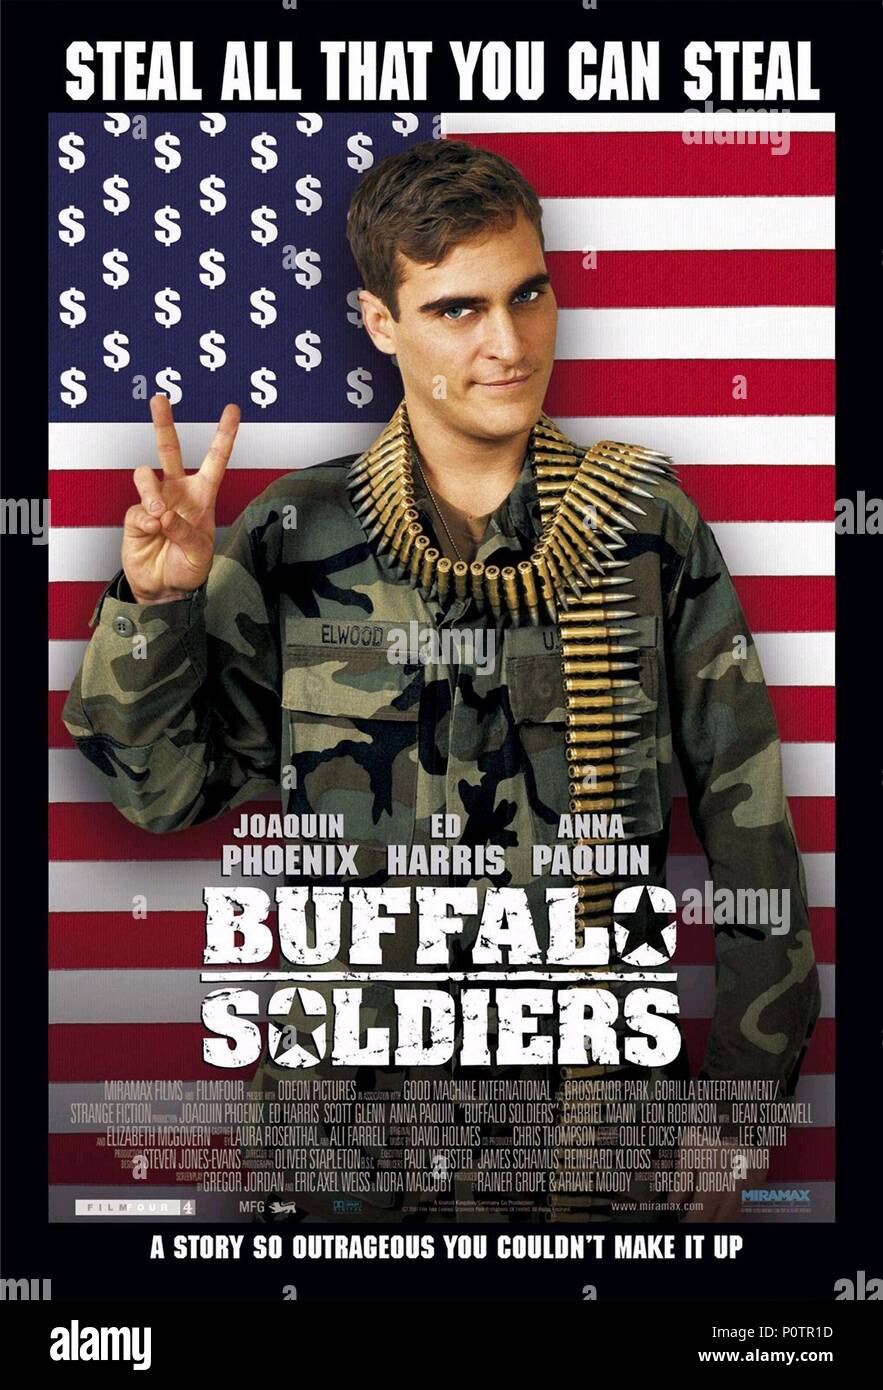 Original Film Title: BUFFALO SOLDIERS. English Title: BUFFALO SOLDIERS. Film Director: GREGOR JORDAN. Year: 2001. Copyright: Editorial inside use only. This is a publicly distributed handout. Access rights only, license of